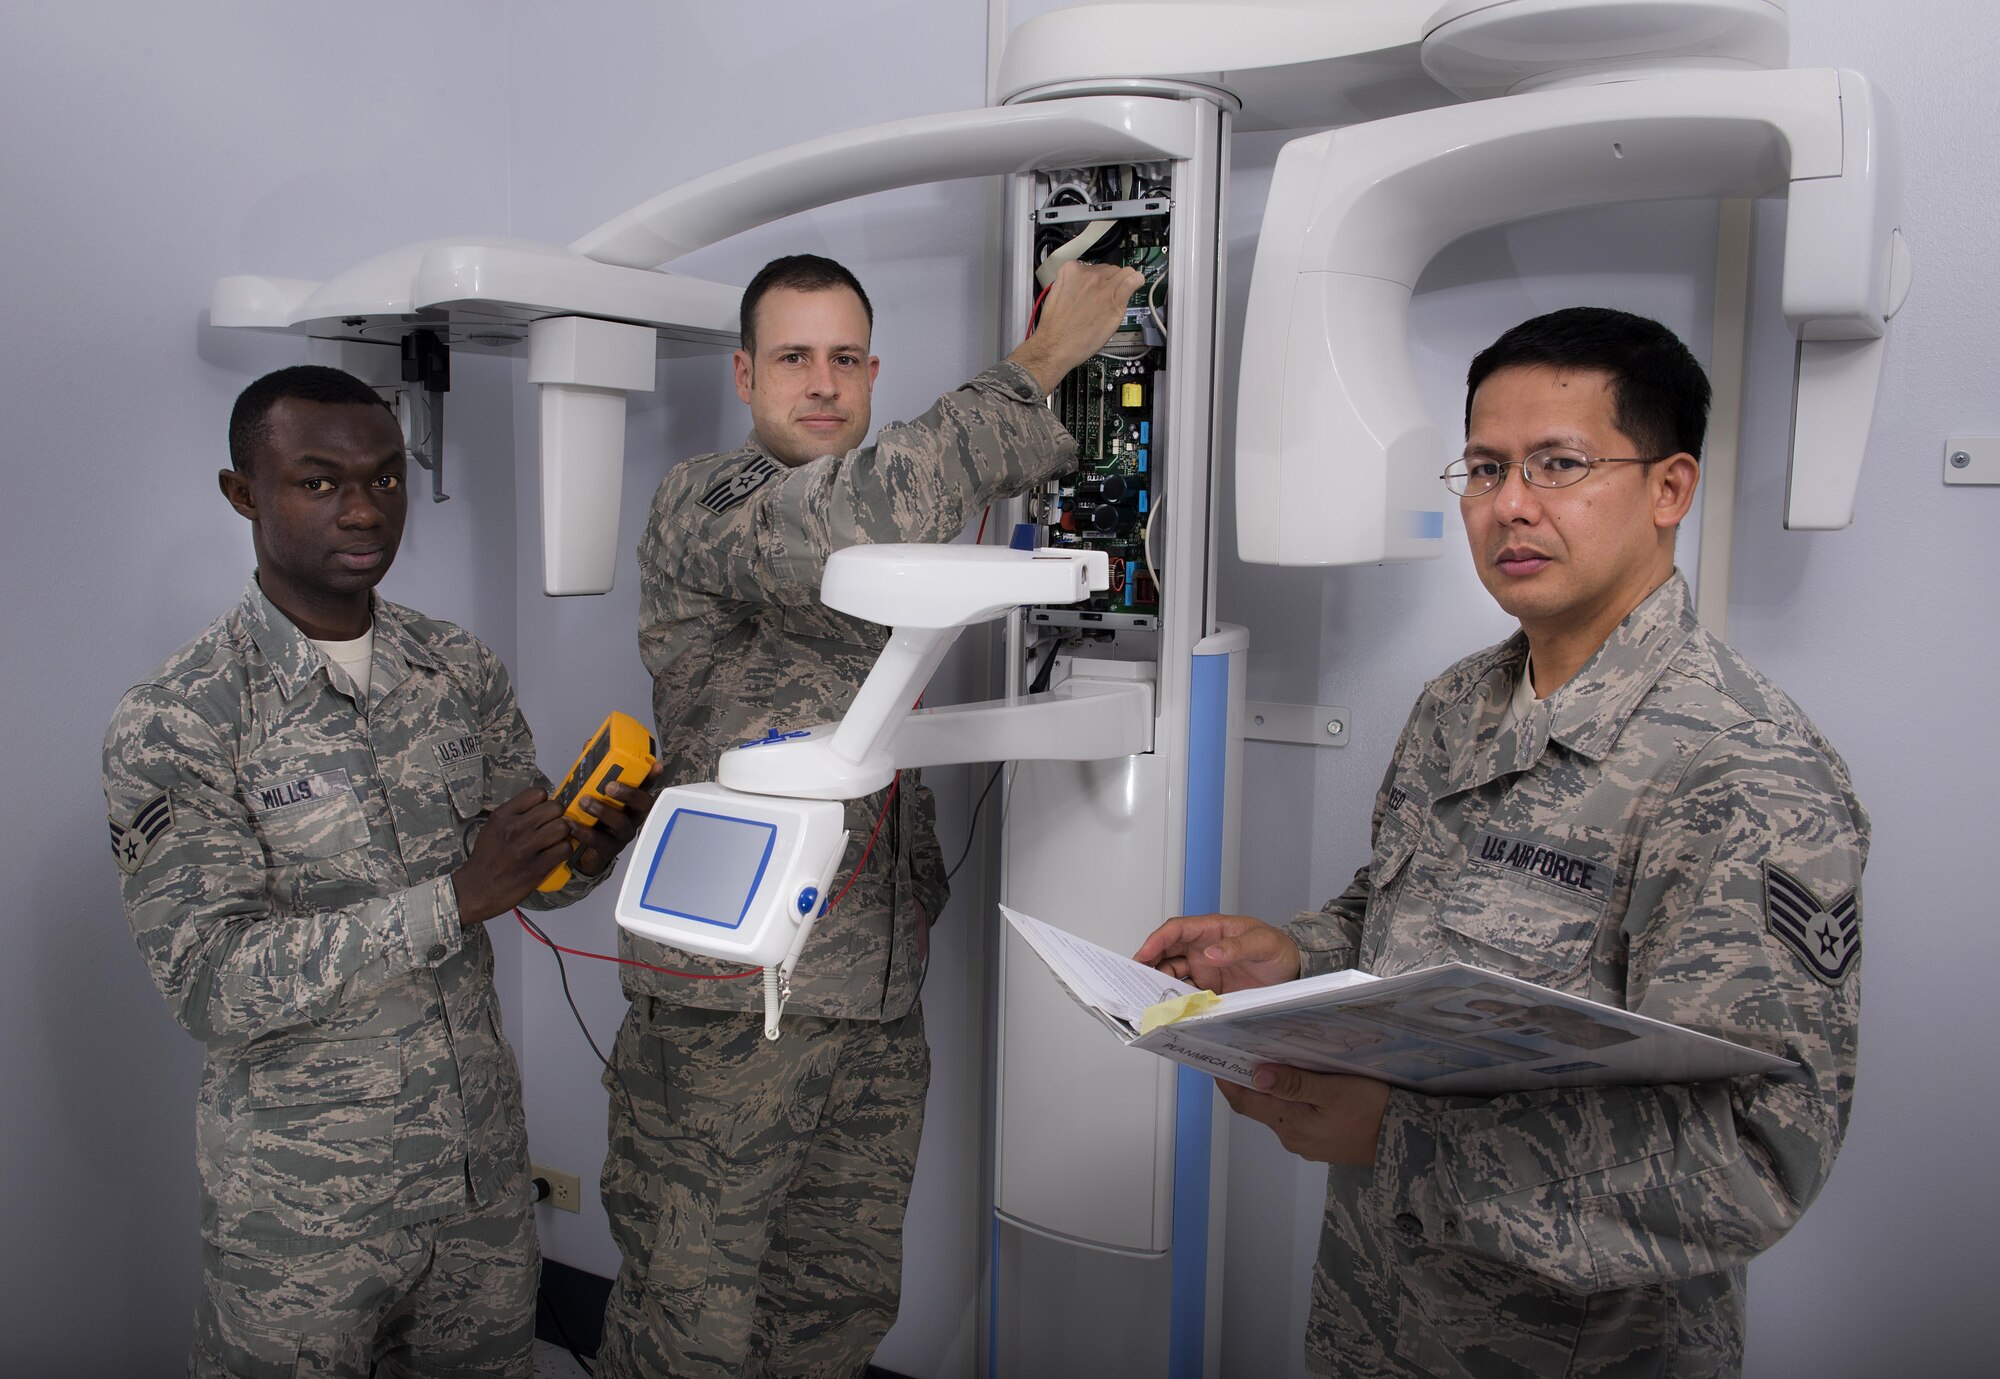 Senior Airman Bright Mills (left), Staff Sgt. Joshua Meyer (middle), and Staff Sgt. Gerry Reed (right), are a three-member biomedical equipment repair team who fixed a $103,000 x-ray machine at Sheppard Air Force Base, Texas. This team spent more than 50 hours getting the machine back on line. (U.S. Air Force photo/Senior Airman Kyle Gese)